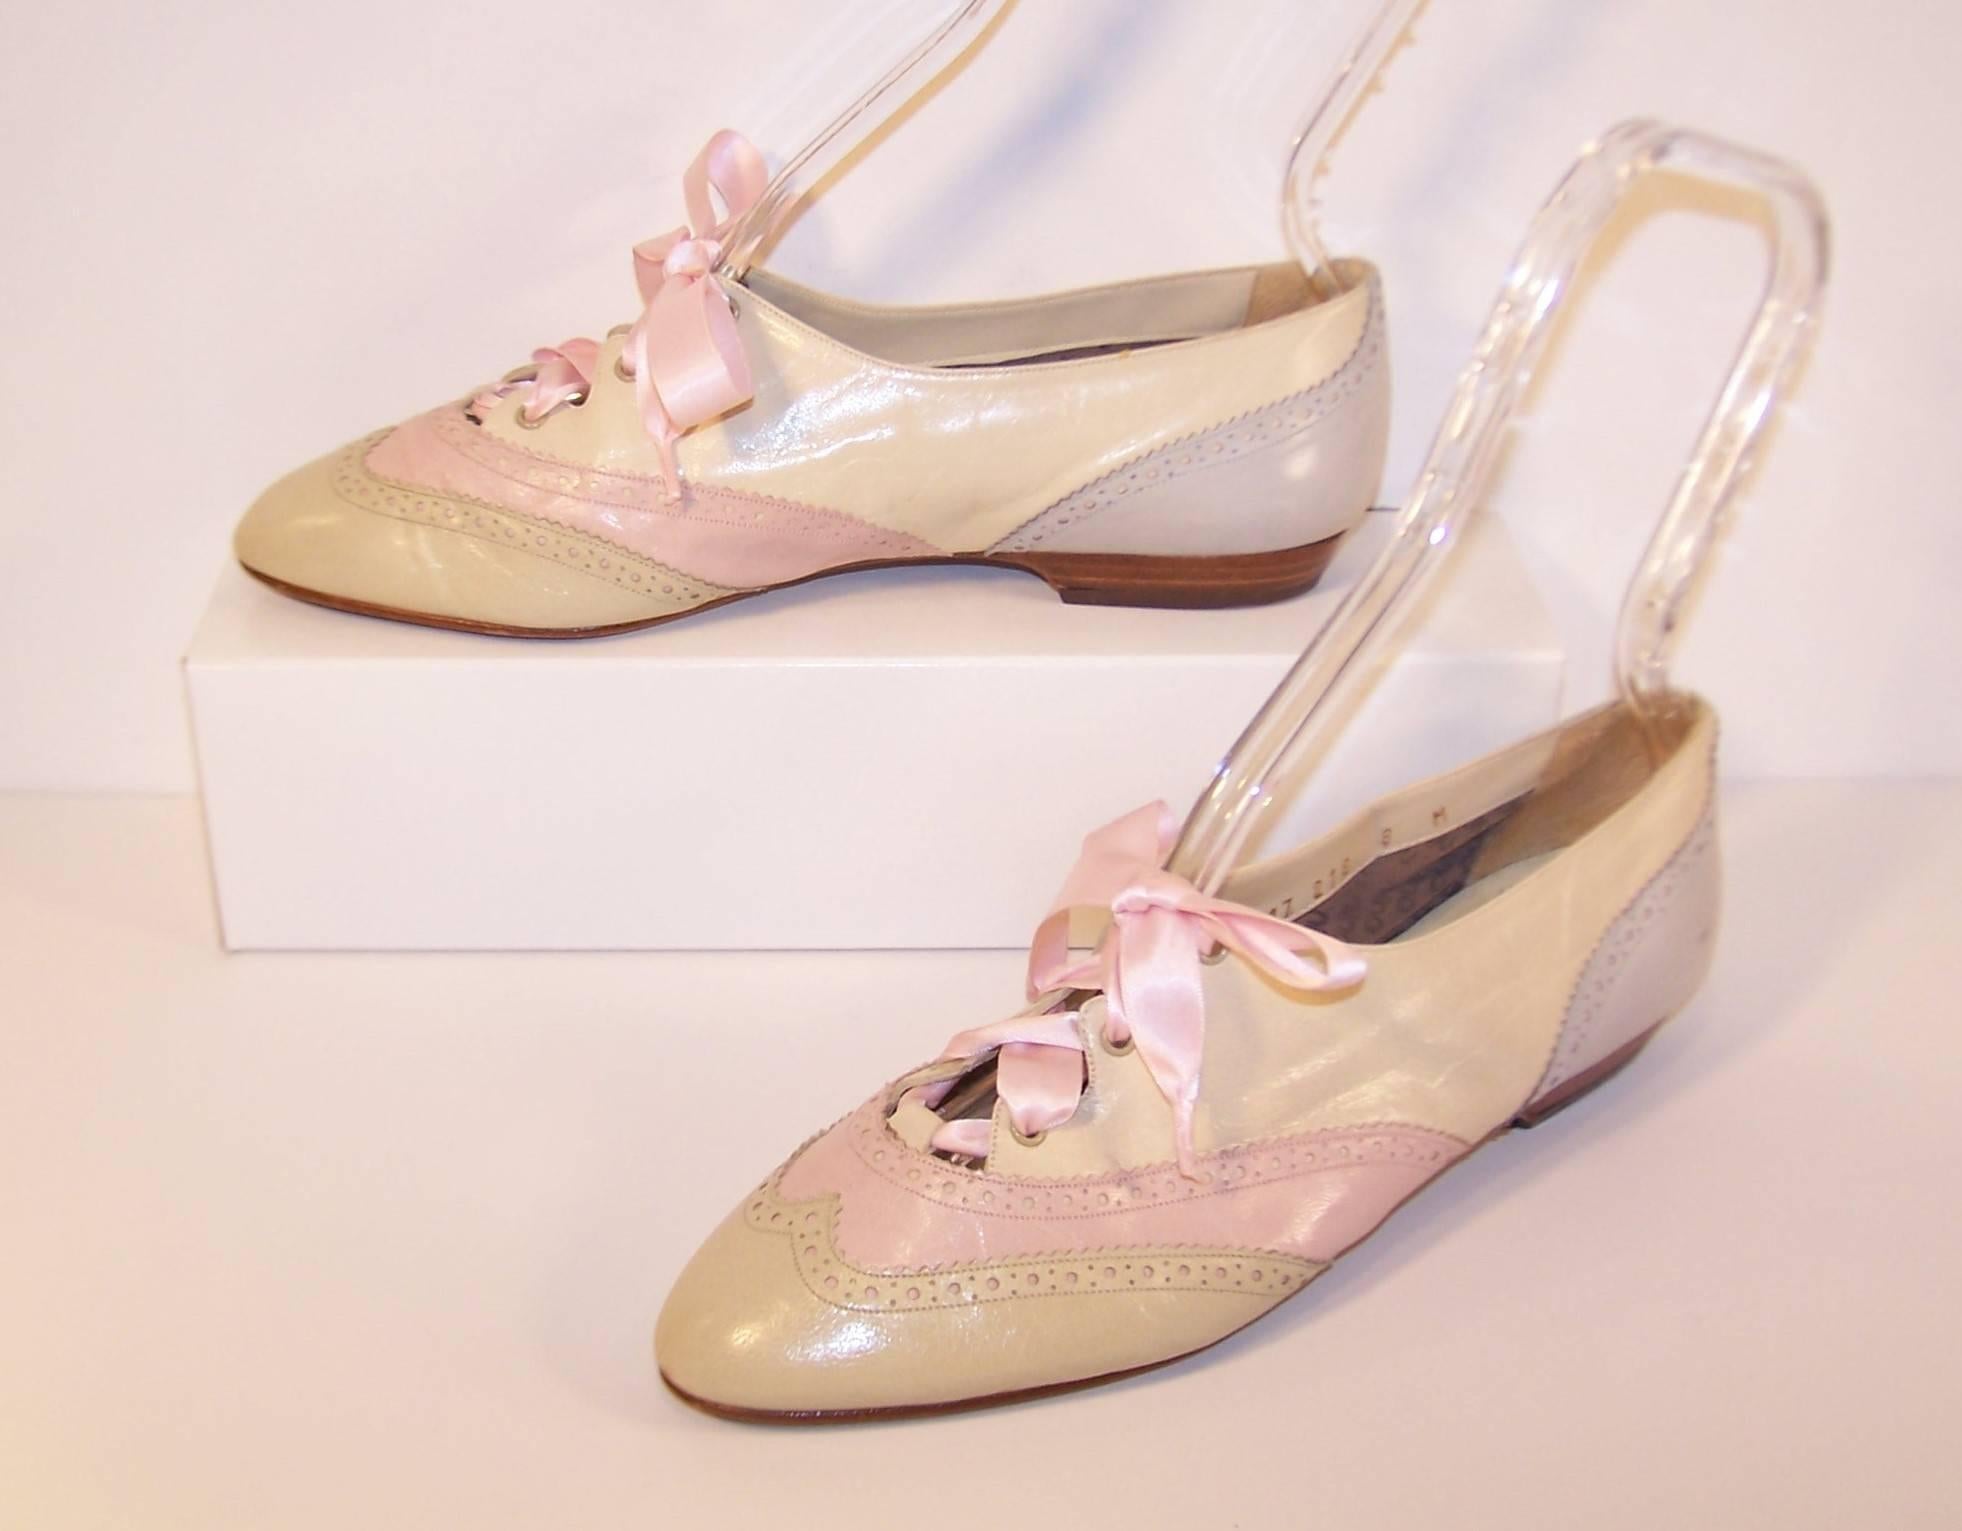 Cheers for the feminine wingtip!  This Nina design from the 1980's combines a menswear style wingtip with an array of pastel colors including creme, ballerina pink, tan and dove gray.  The pointy toe construction fits right in with current trends